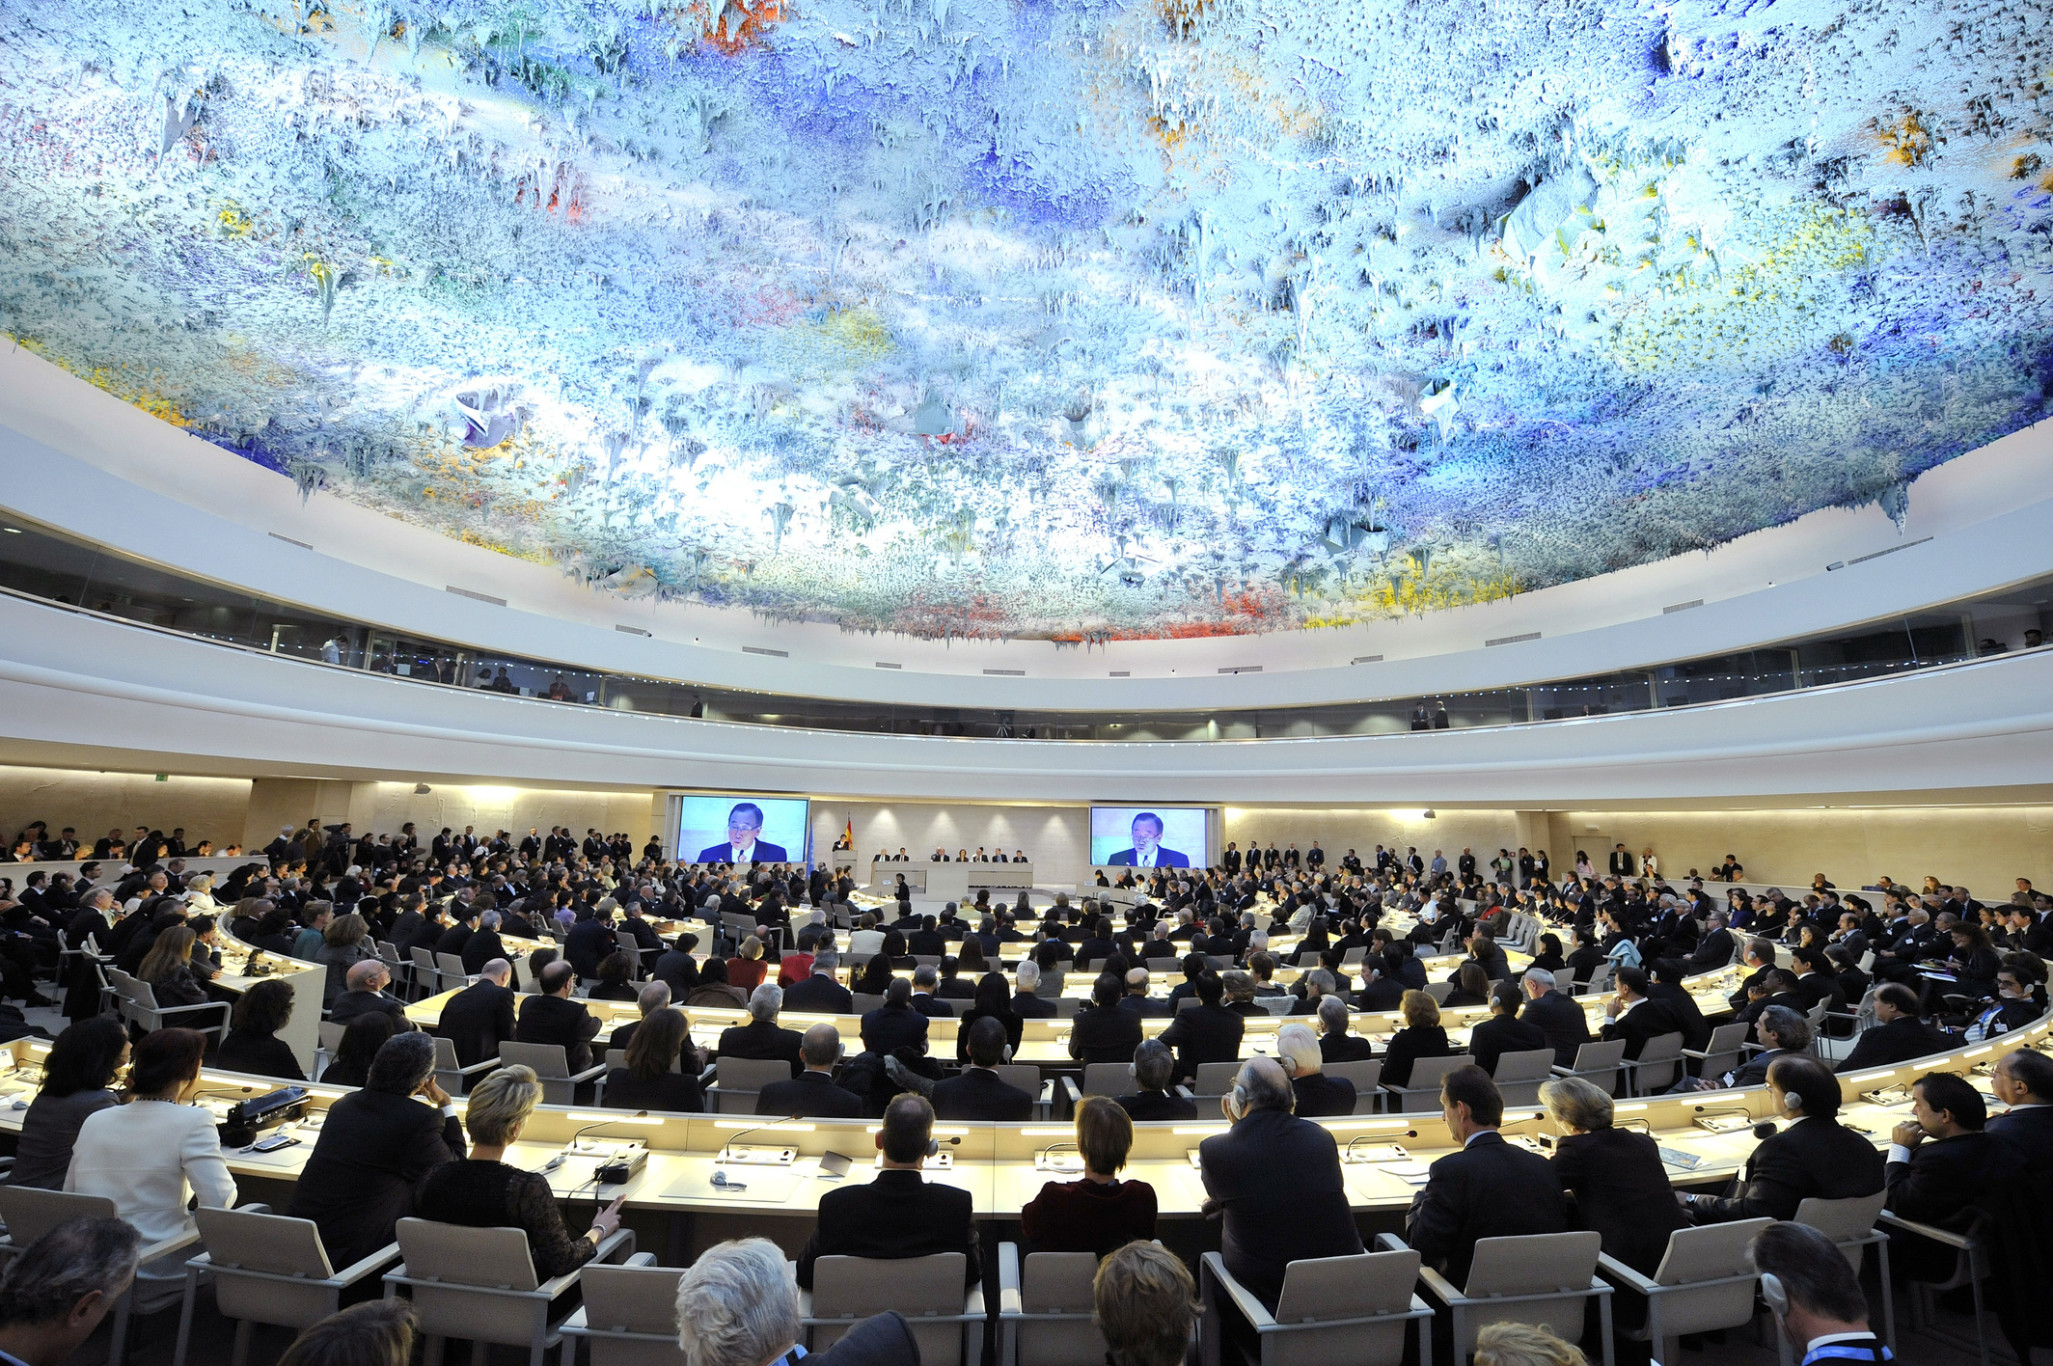 Human rights council – 55th session – ID with Special Rapporteur on freedom of religion or belief